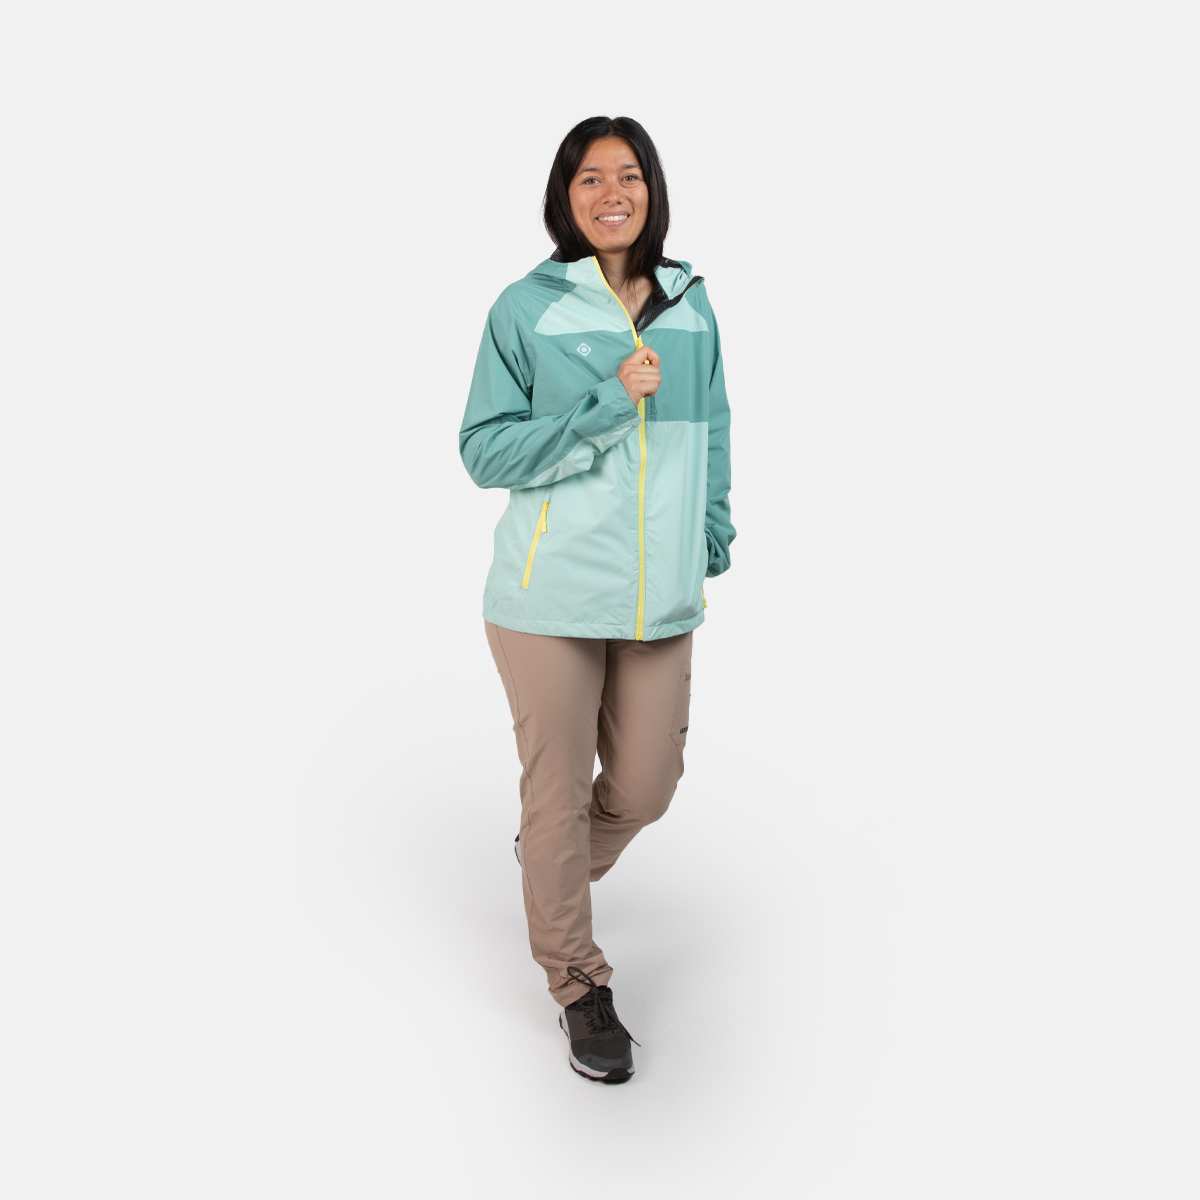  CHAQUETA TÉCNICA IMPERMEABLE VERDE MUJER PONS W